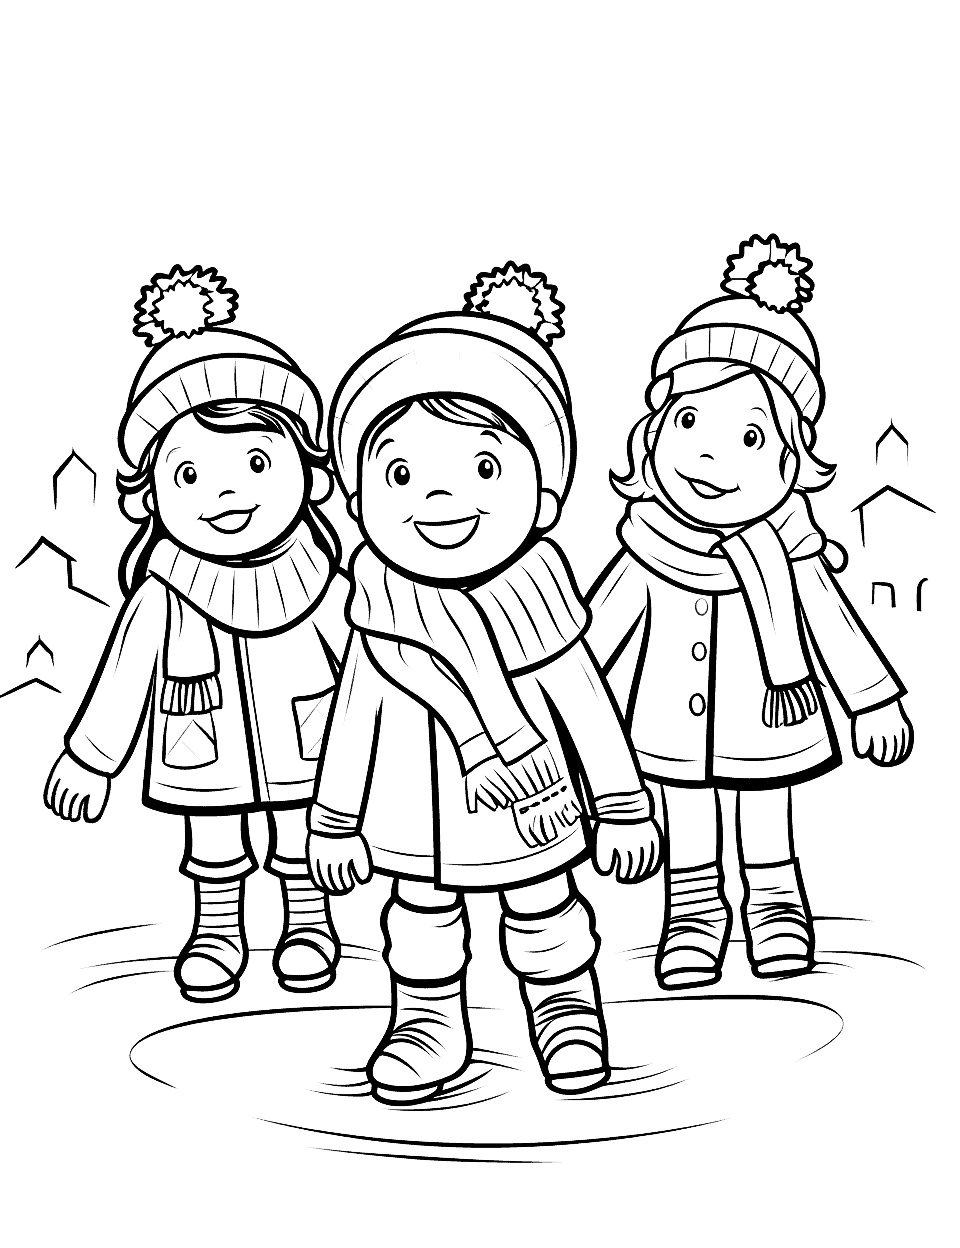 Ice Skating Party Christmas Coloring Page - Friends having fun at an ice skating party on a frozen pond.